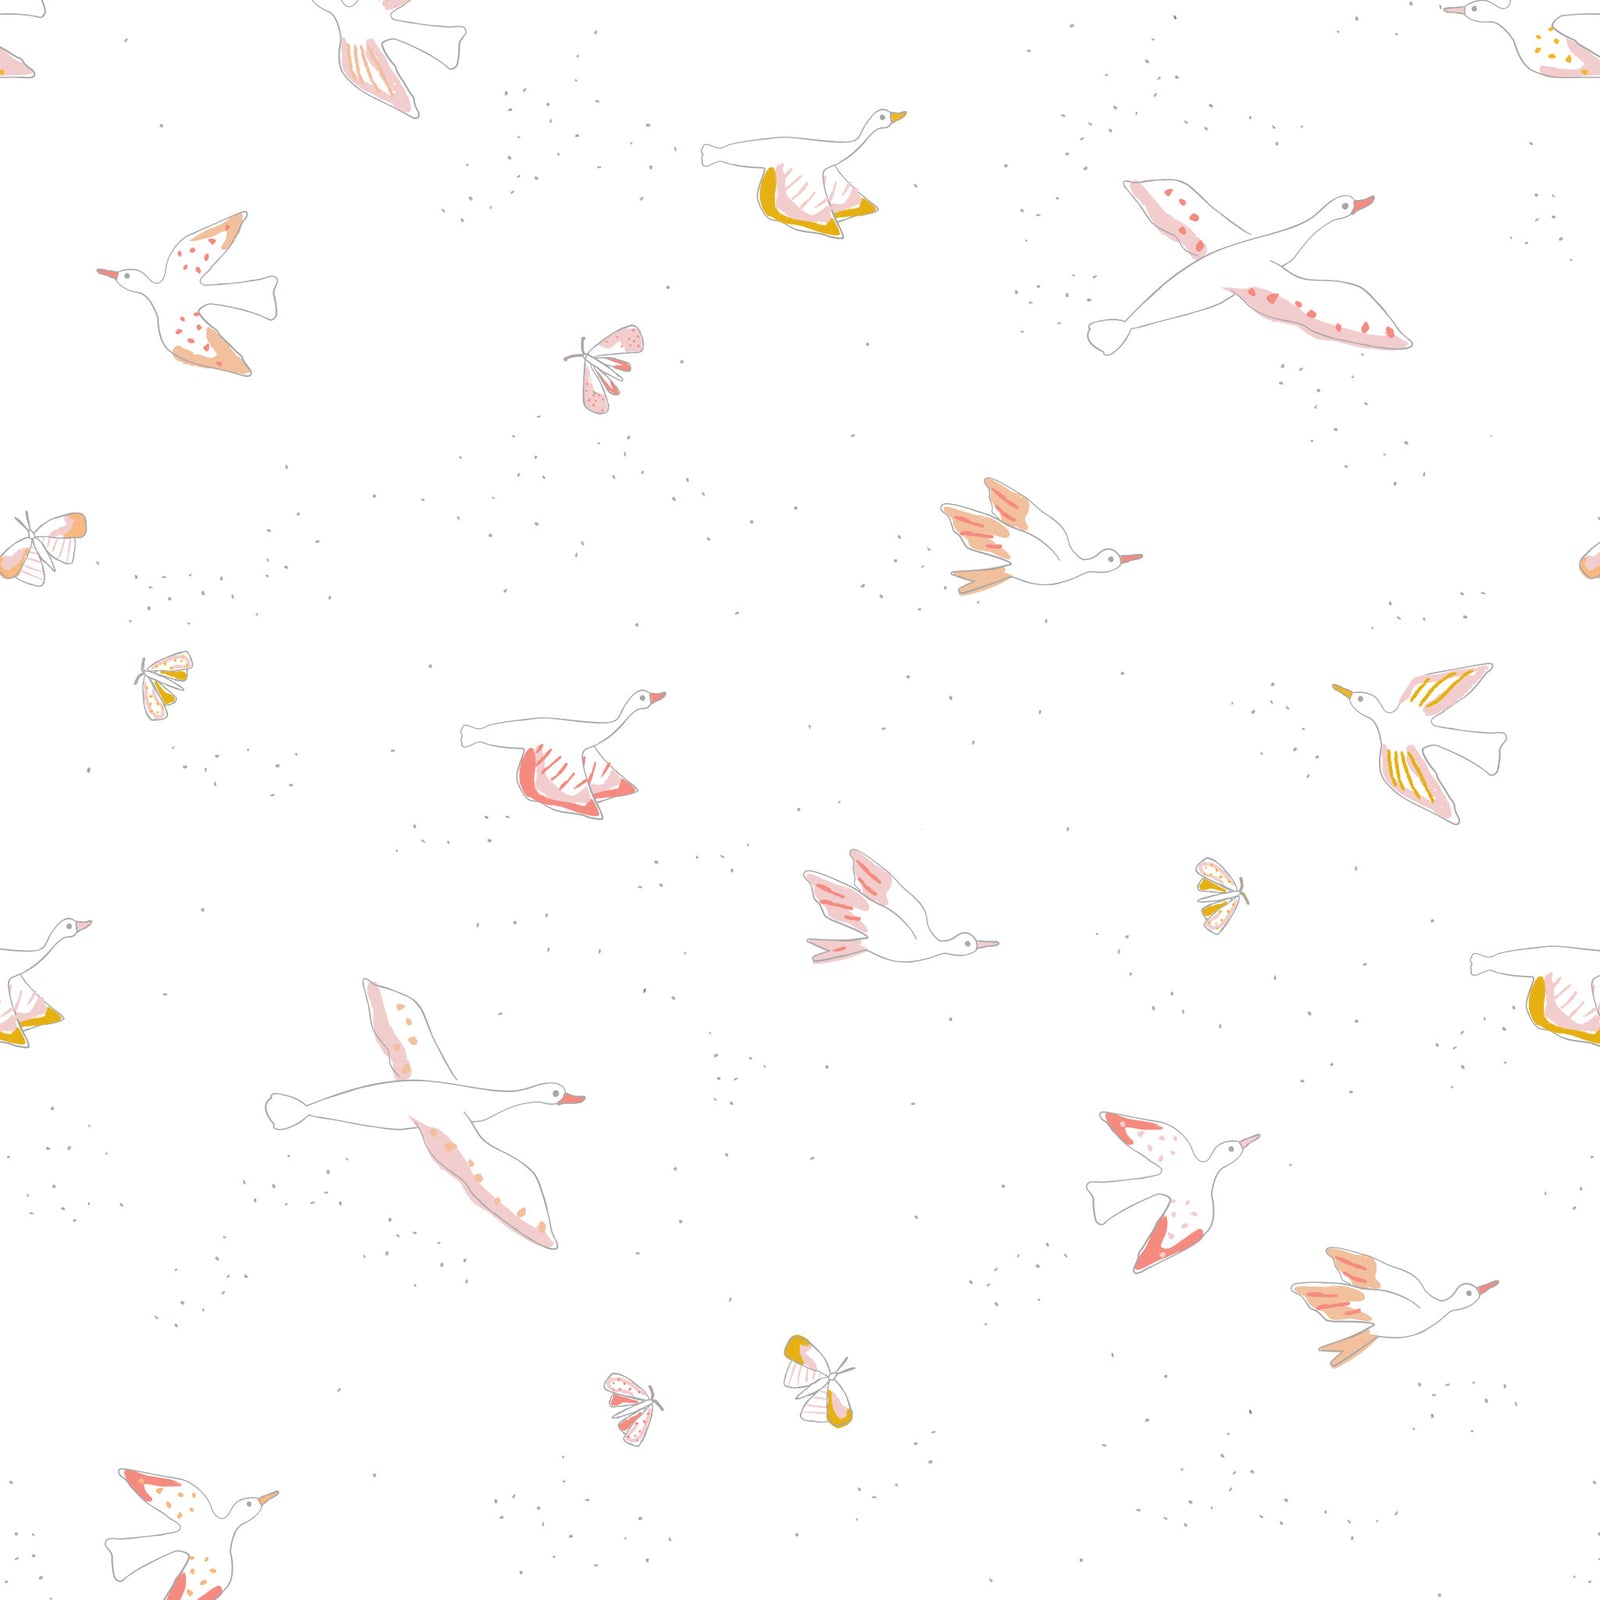 Chasing Paper X Pehr Wallpaper Wallpaper Chasing Paper X Pehr Birds of a Feather 2' x 4' 